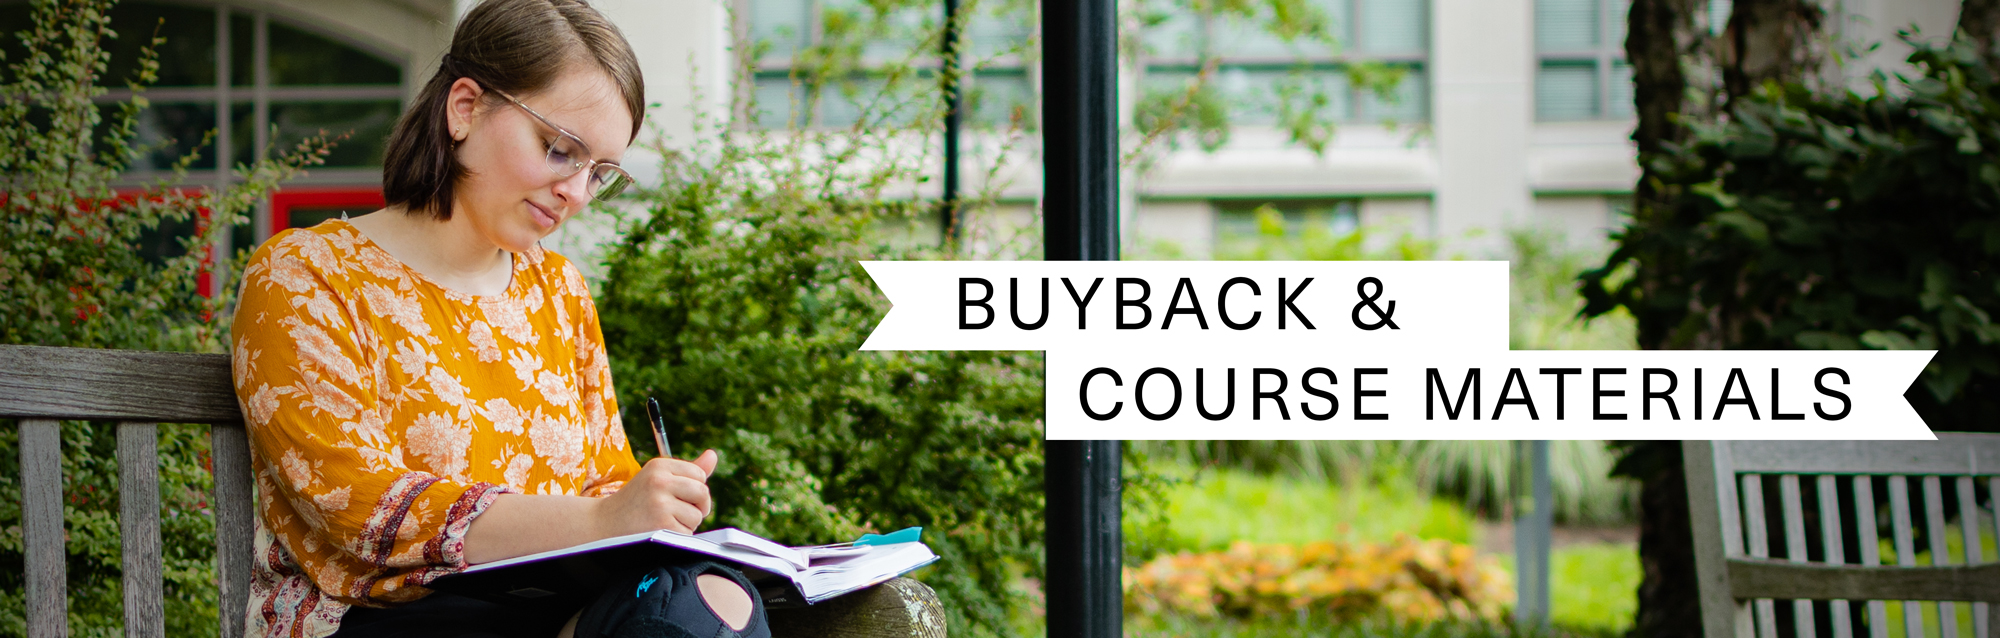 Buyback and Course Materials